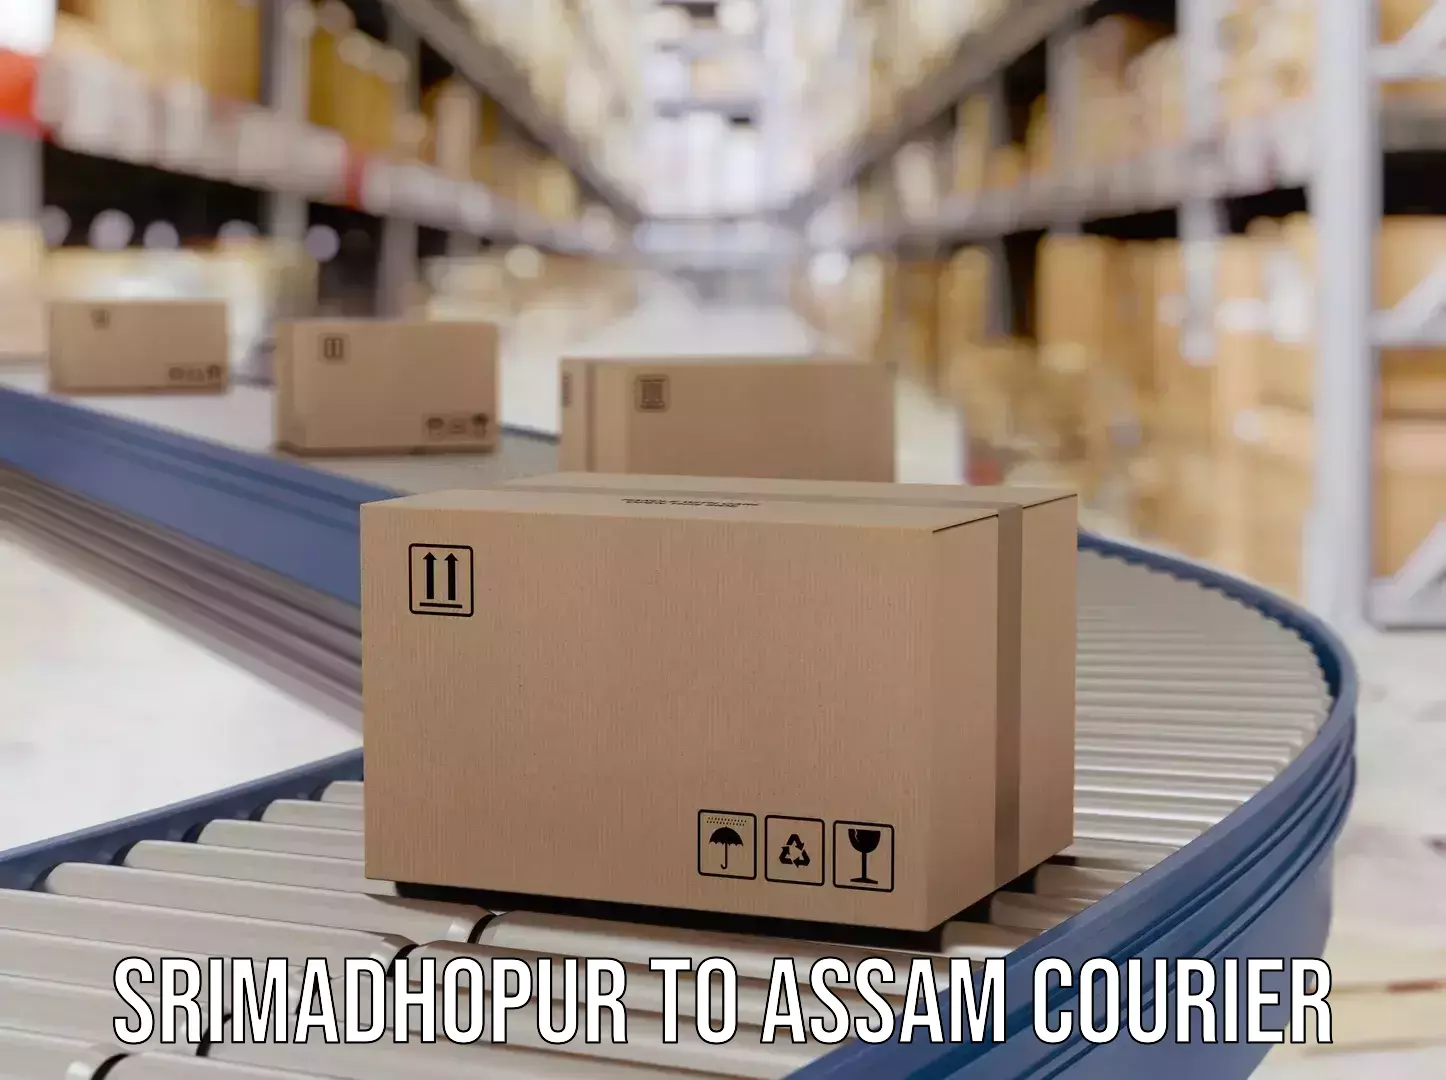 Supply chain efficiency Srimadhopur to Assam